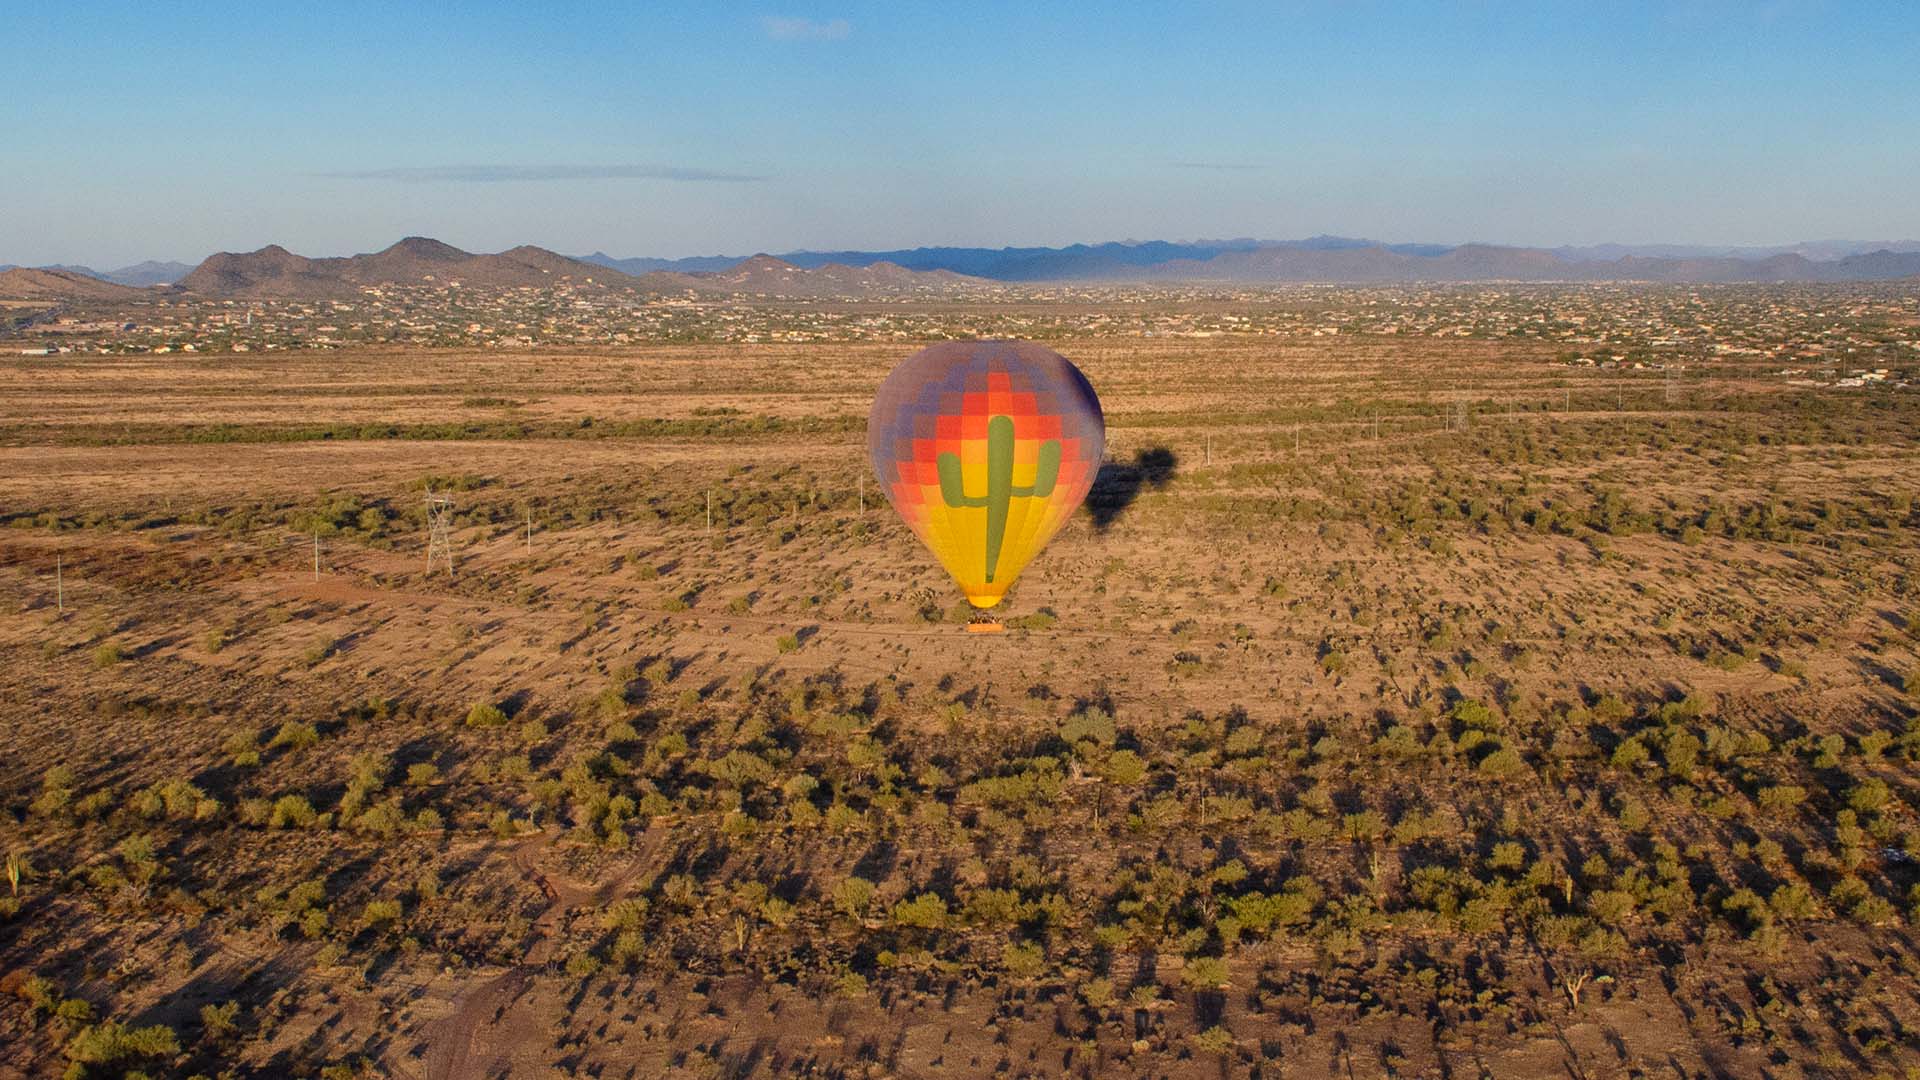 "You don't realize how huge hot air balloons are until you're riding in one," said the writer.